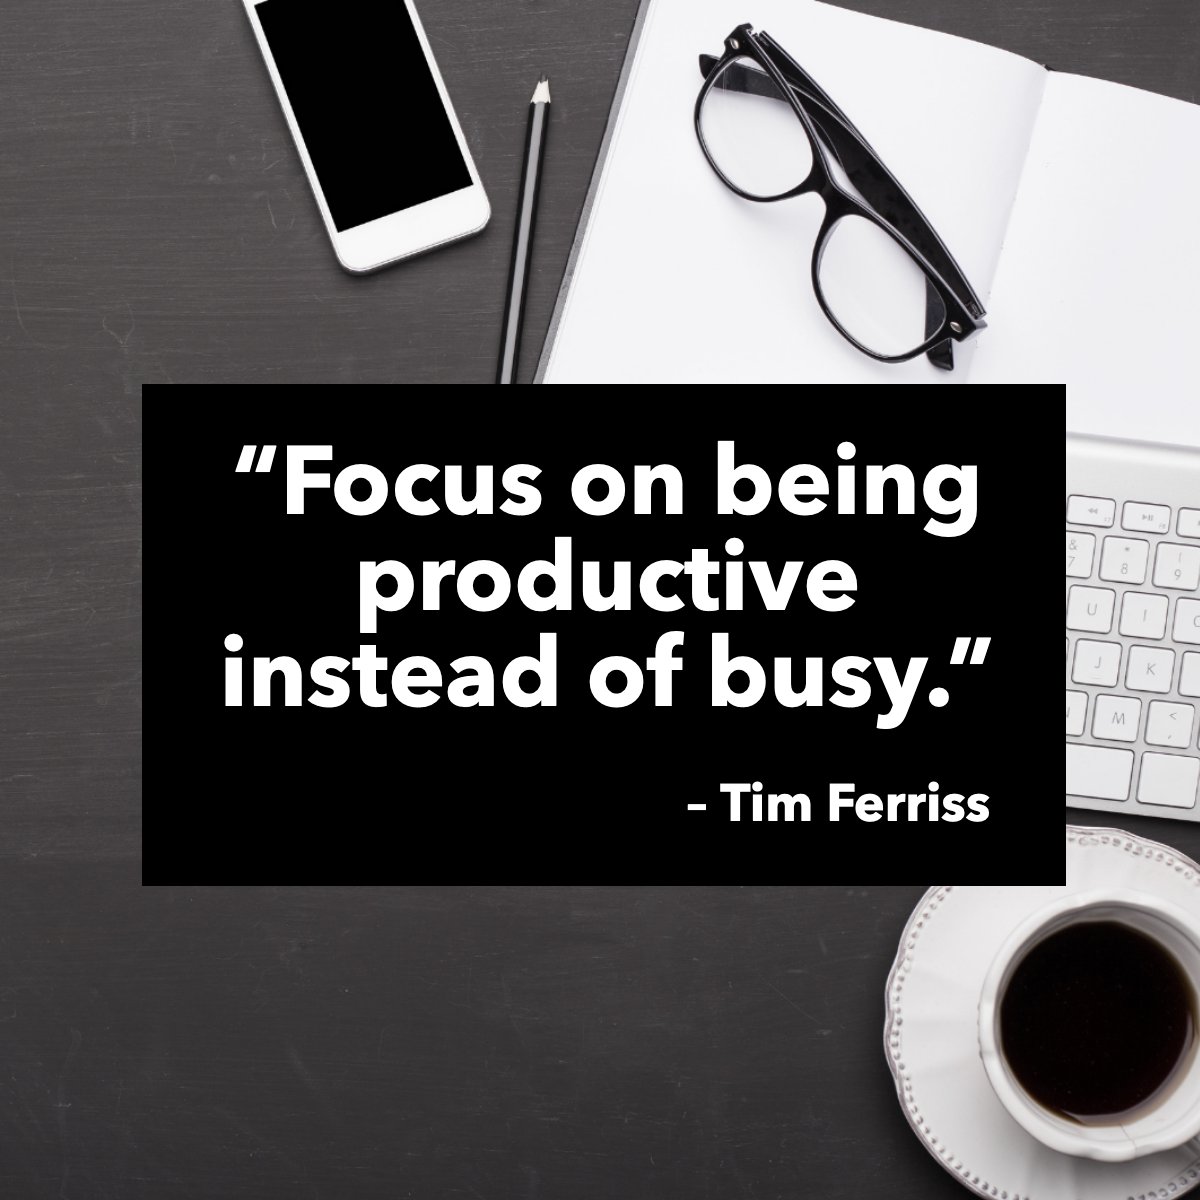 Being productive means you are getting quality work done that helps you get closer to reaching goals or finishing important tasks. 💻💡

#beproductive #stayproductive #productivetime #productivepeople